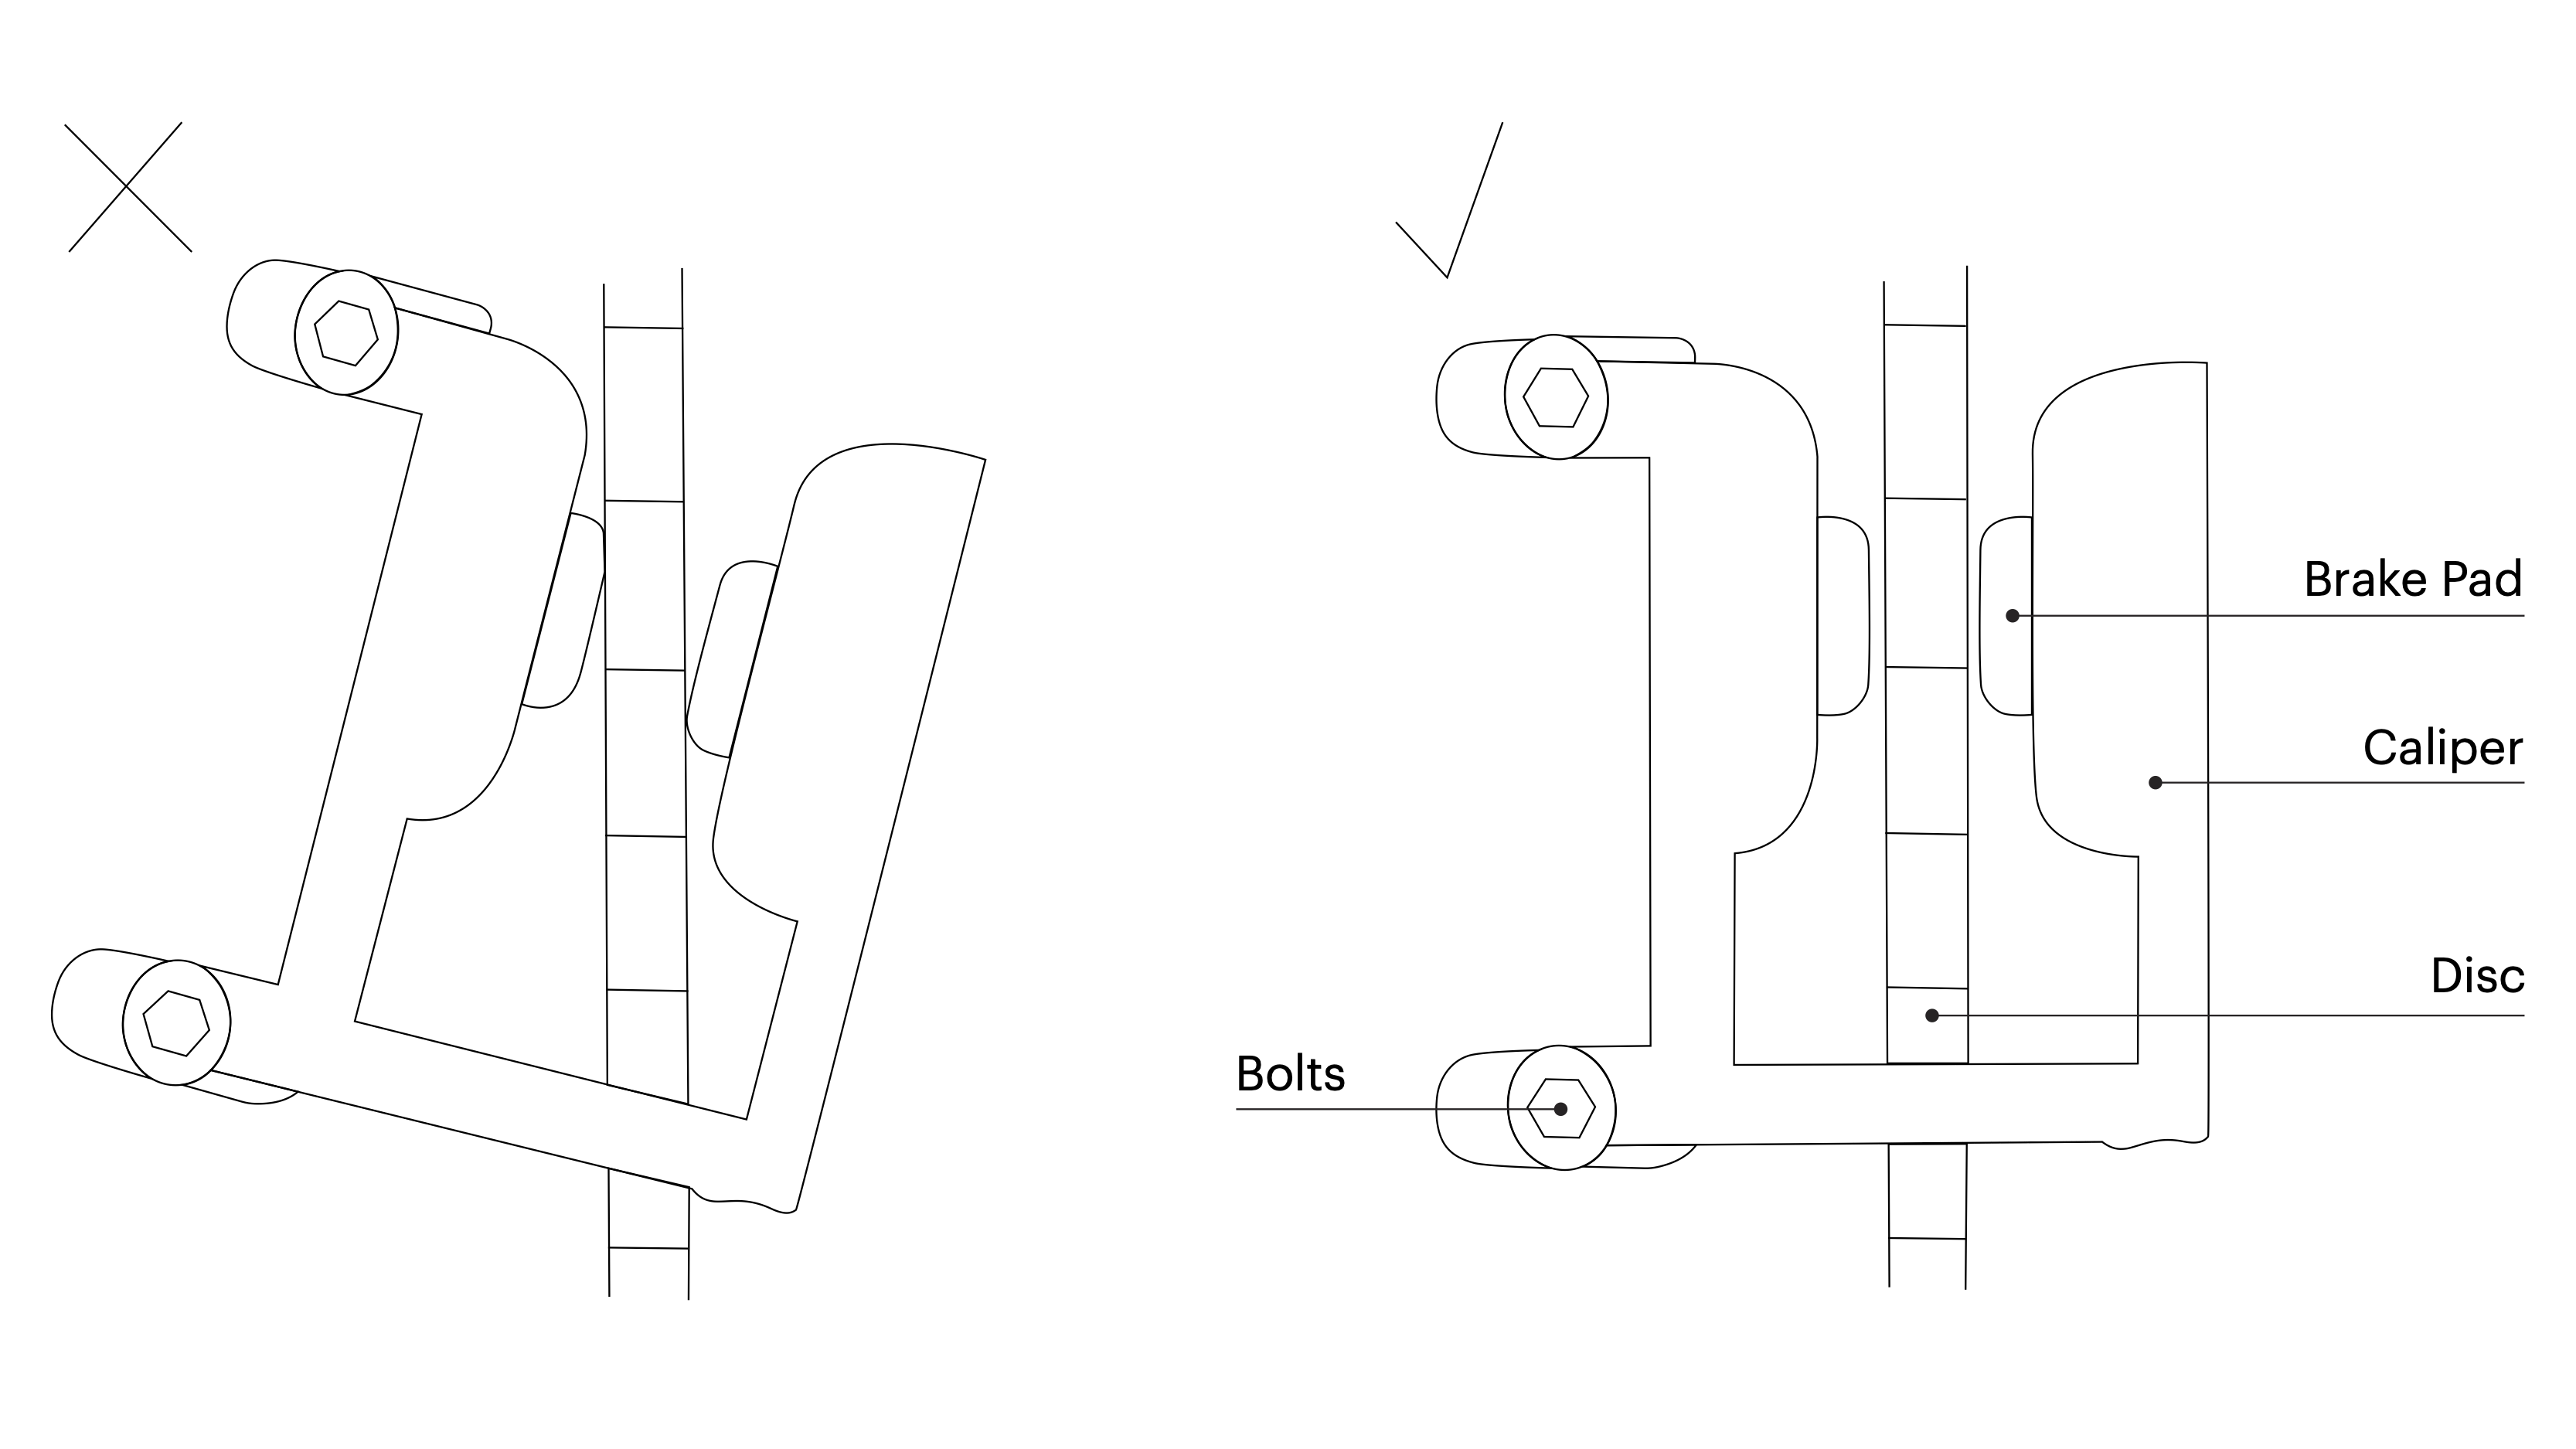 Line drawing showing incorrect and correctly aligned brake calipers